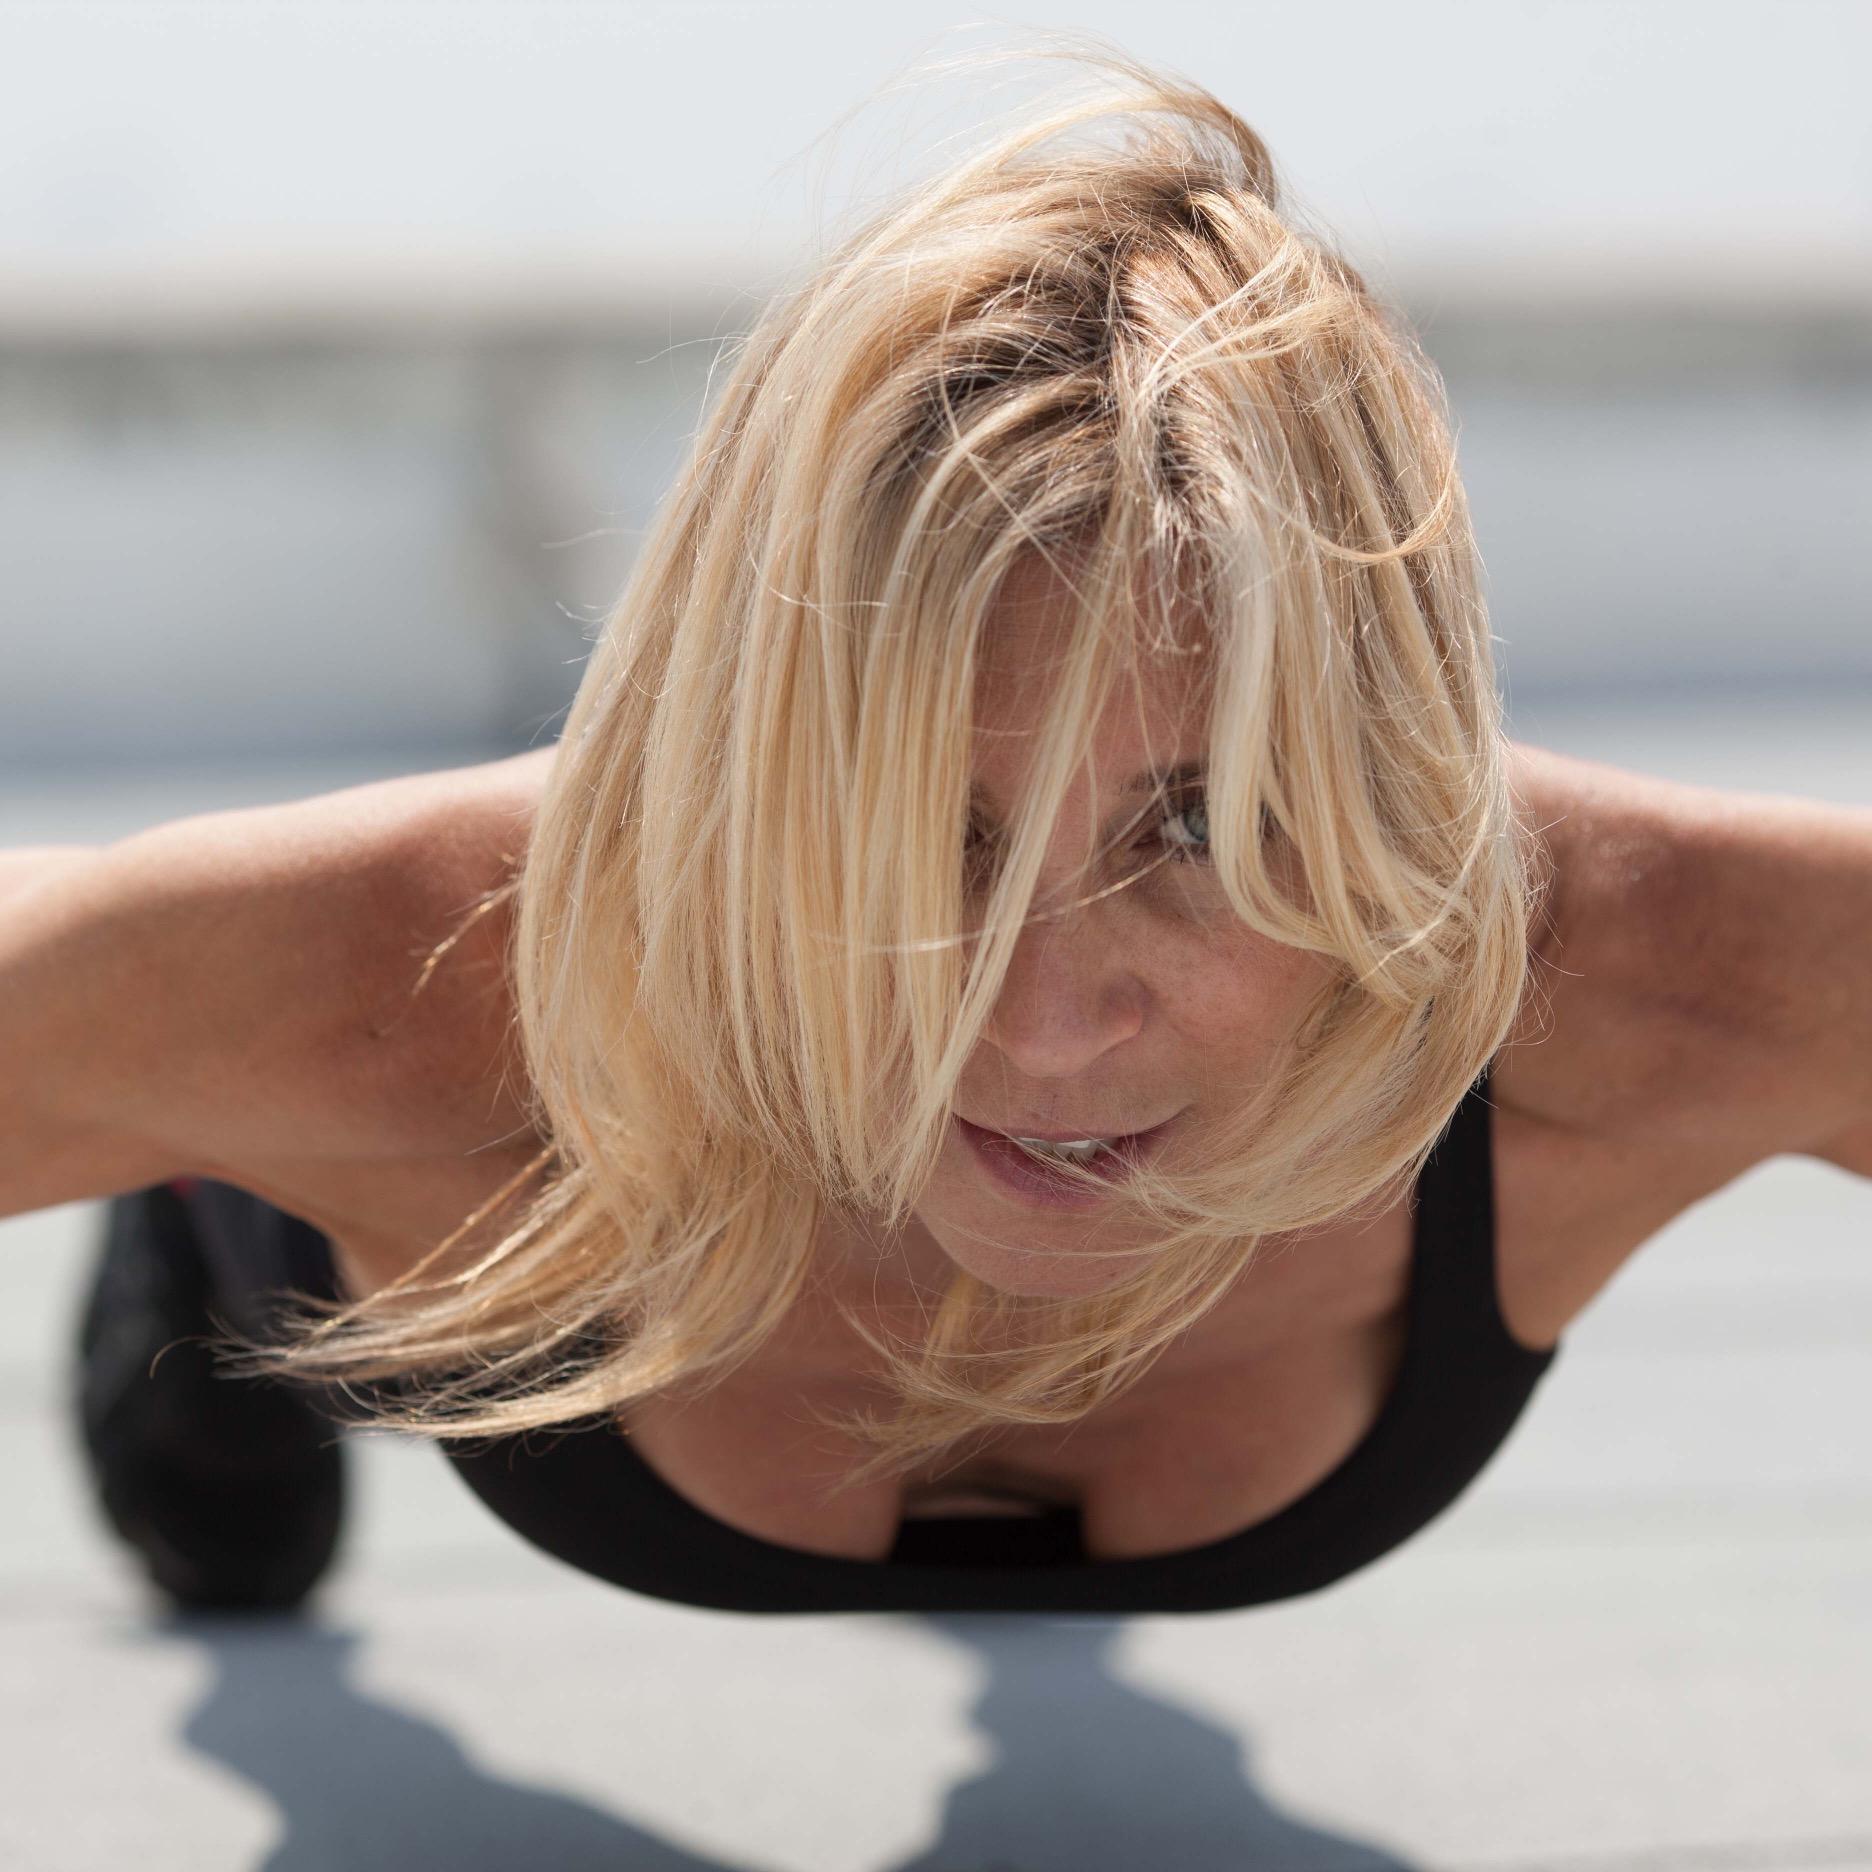 Julie is a highly regarded fitness trainer with a dynamic approach to health and fitness that is fun and educational with some tough love mixed in .